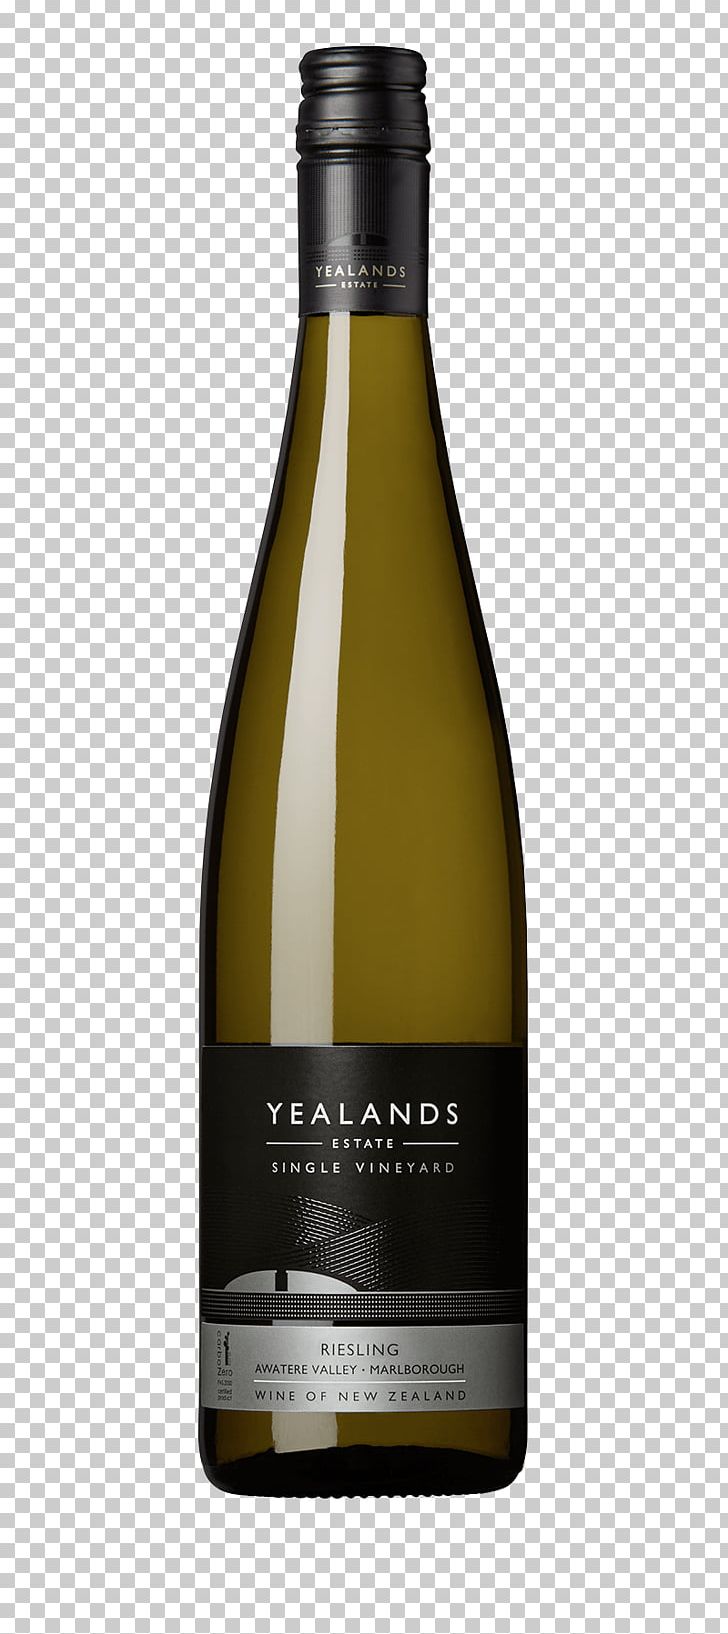 Wine Sauvignon Blanc Riesling Pinot Noir Pinot Gris PNG, Clipart, Alcoholic Beverage, Alcoholic Drink, Bottle, Champagne, Common Grape Vine Free PNG Download